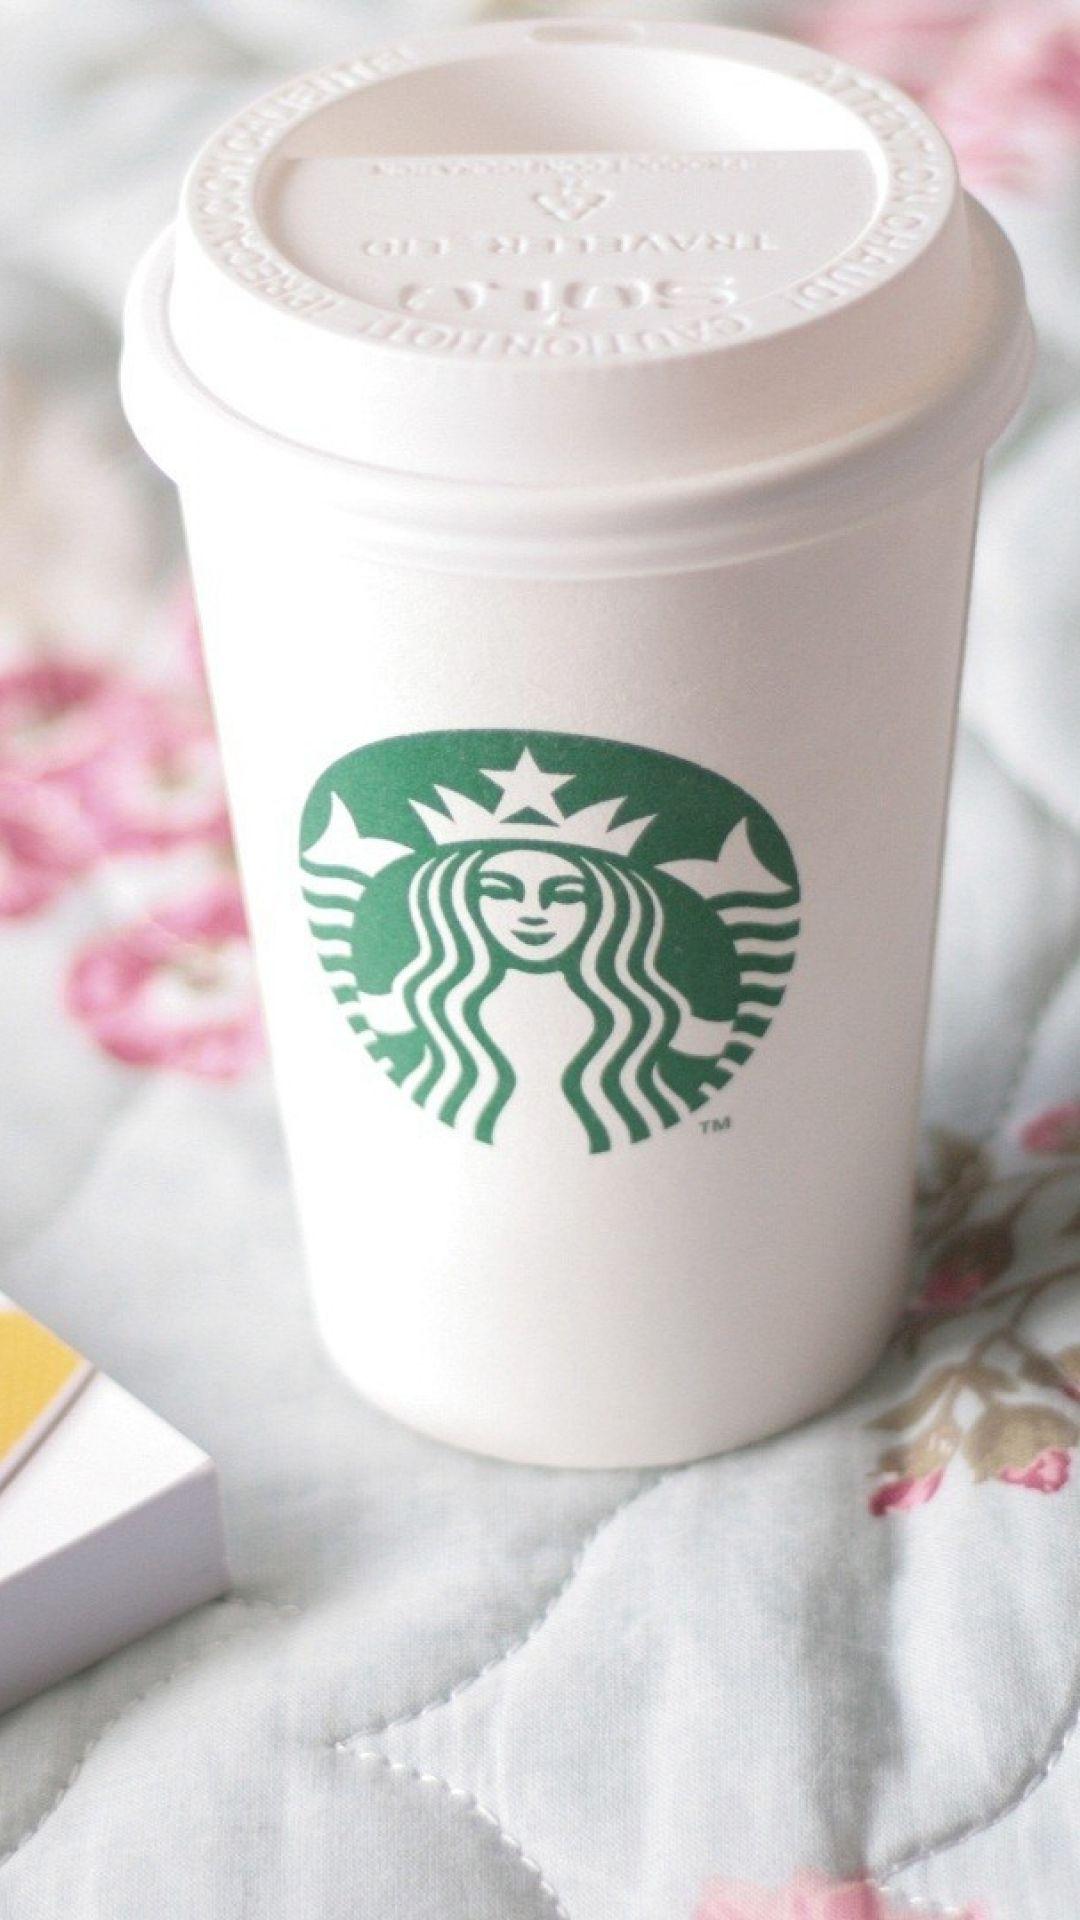 Starbucks Coffee Cup Android Wallpaper free download